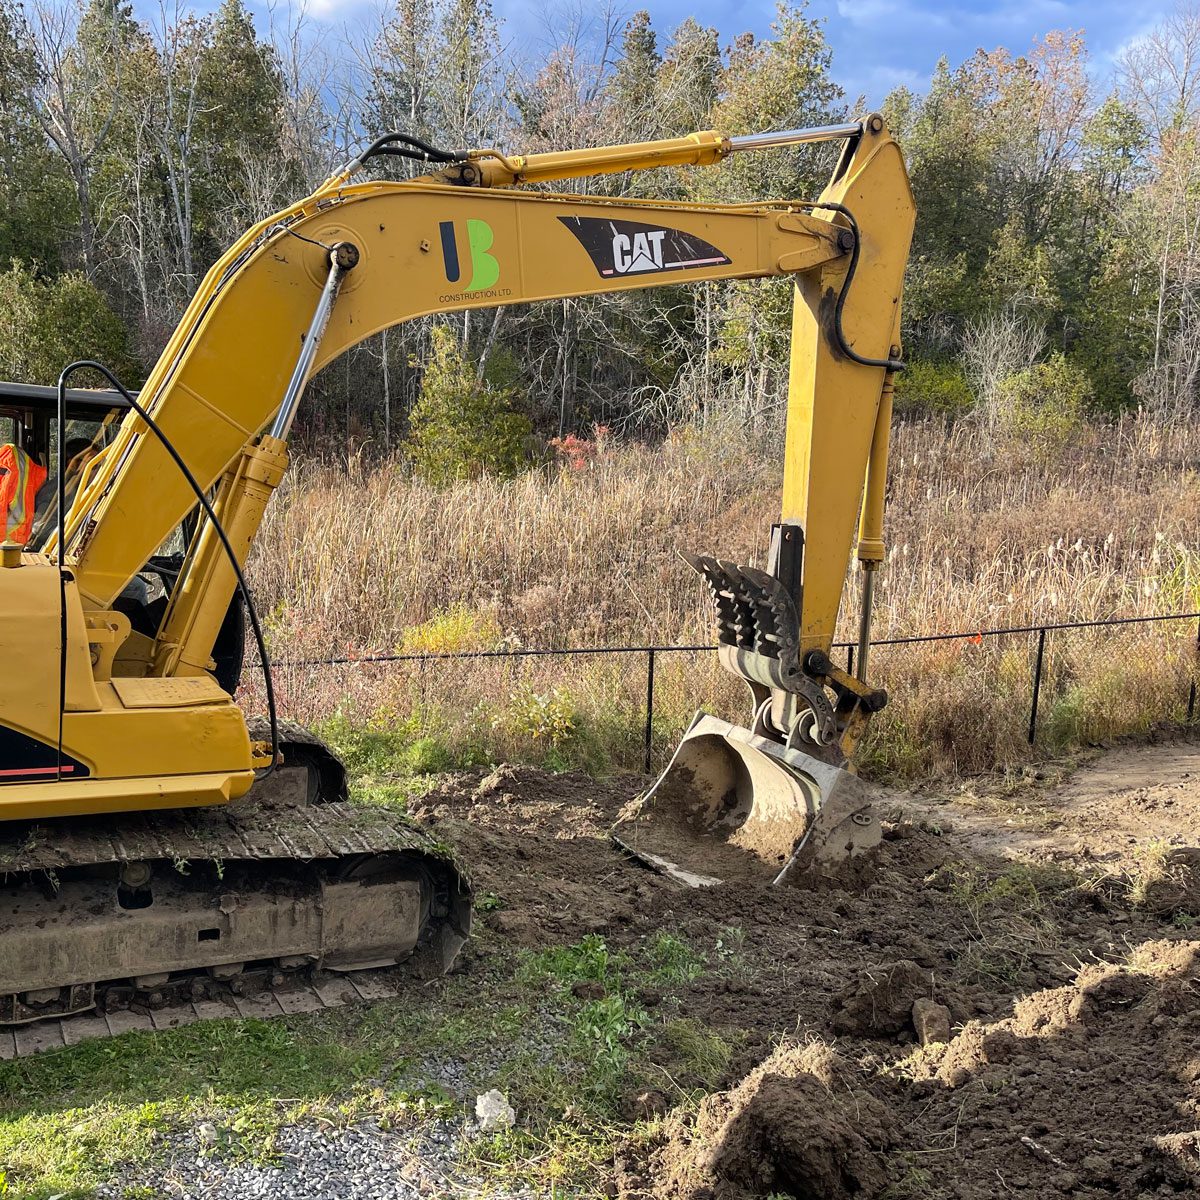 Excavator for excavation and site prep